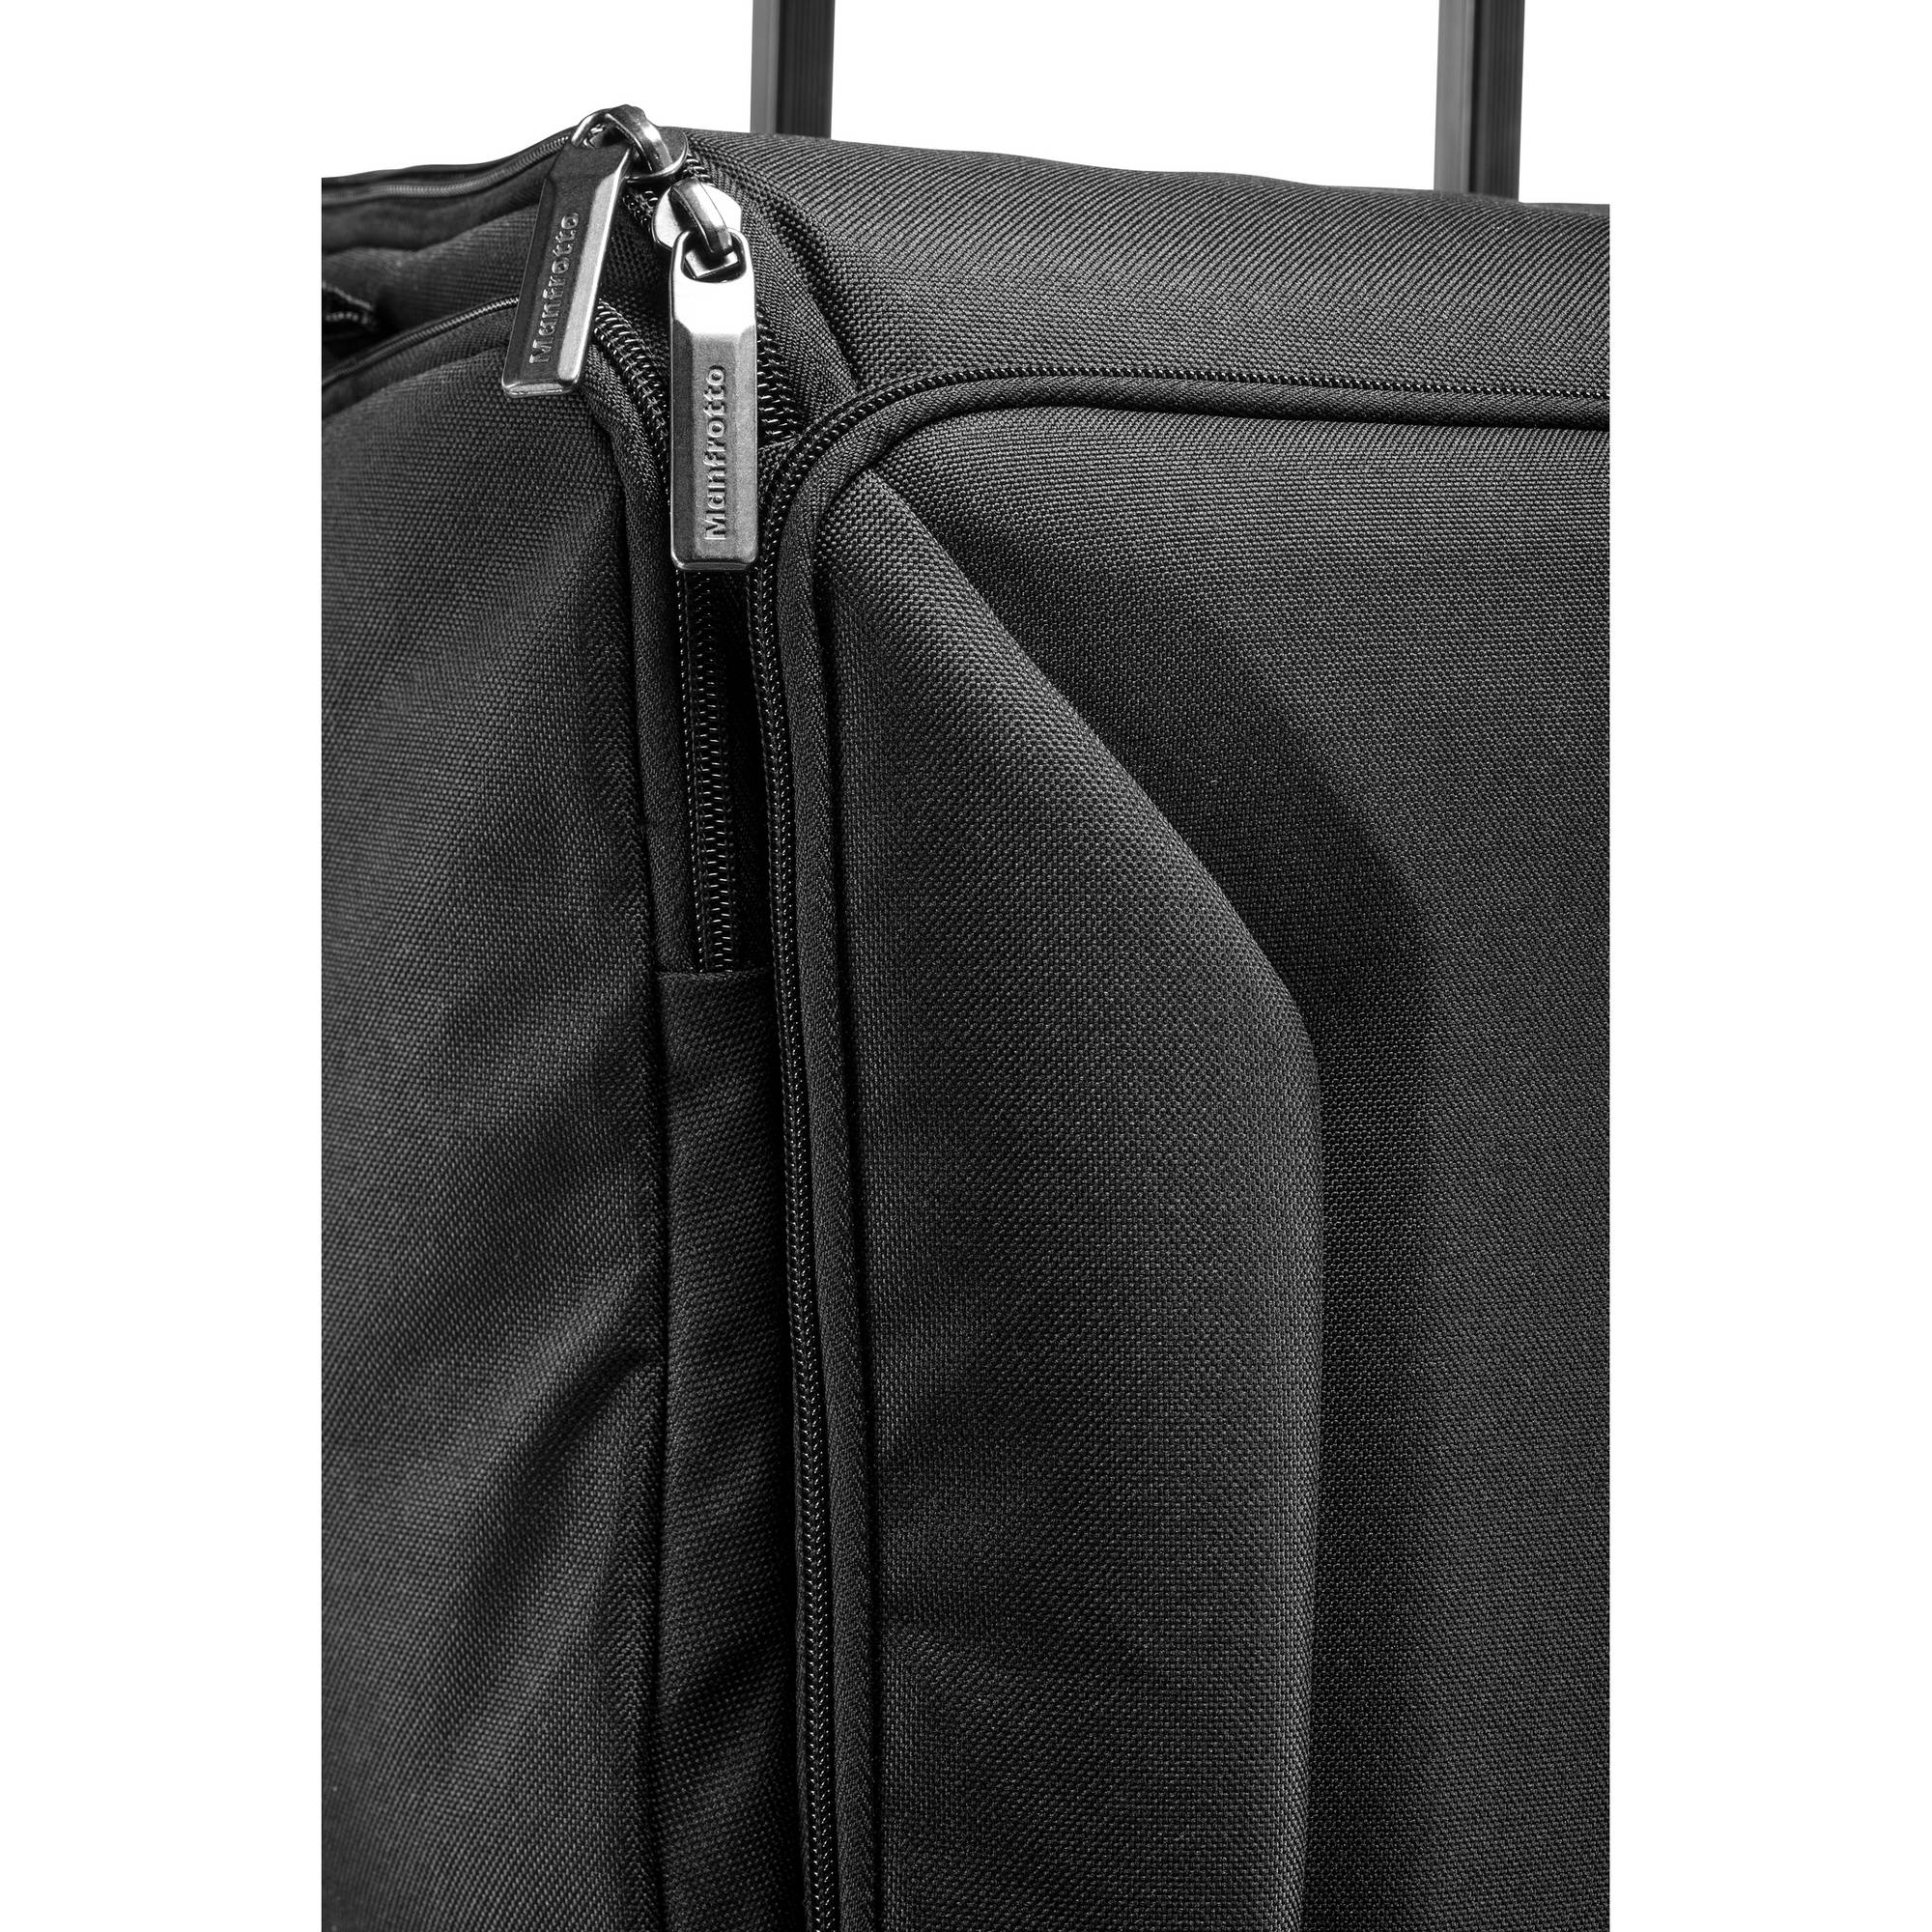 Manfrotto Pro Roller Bag 70